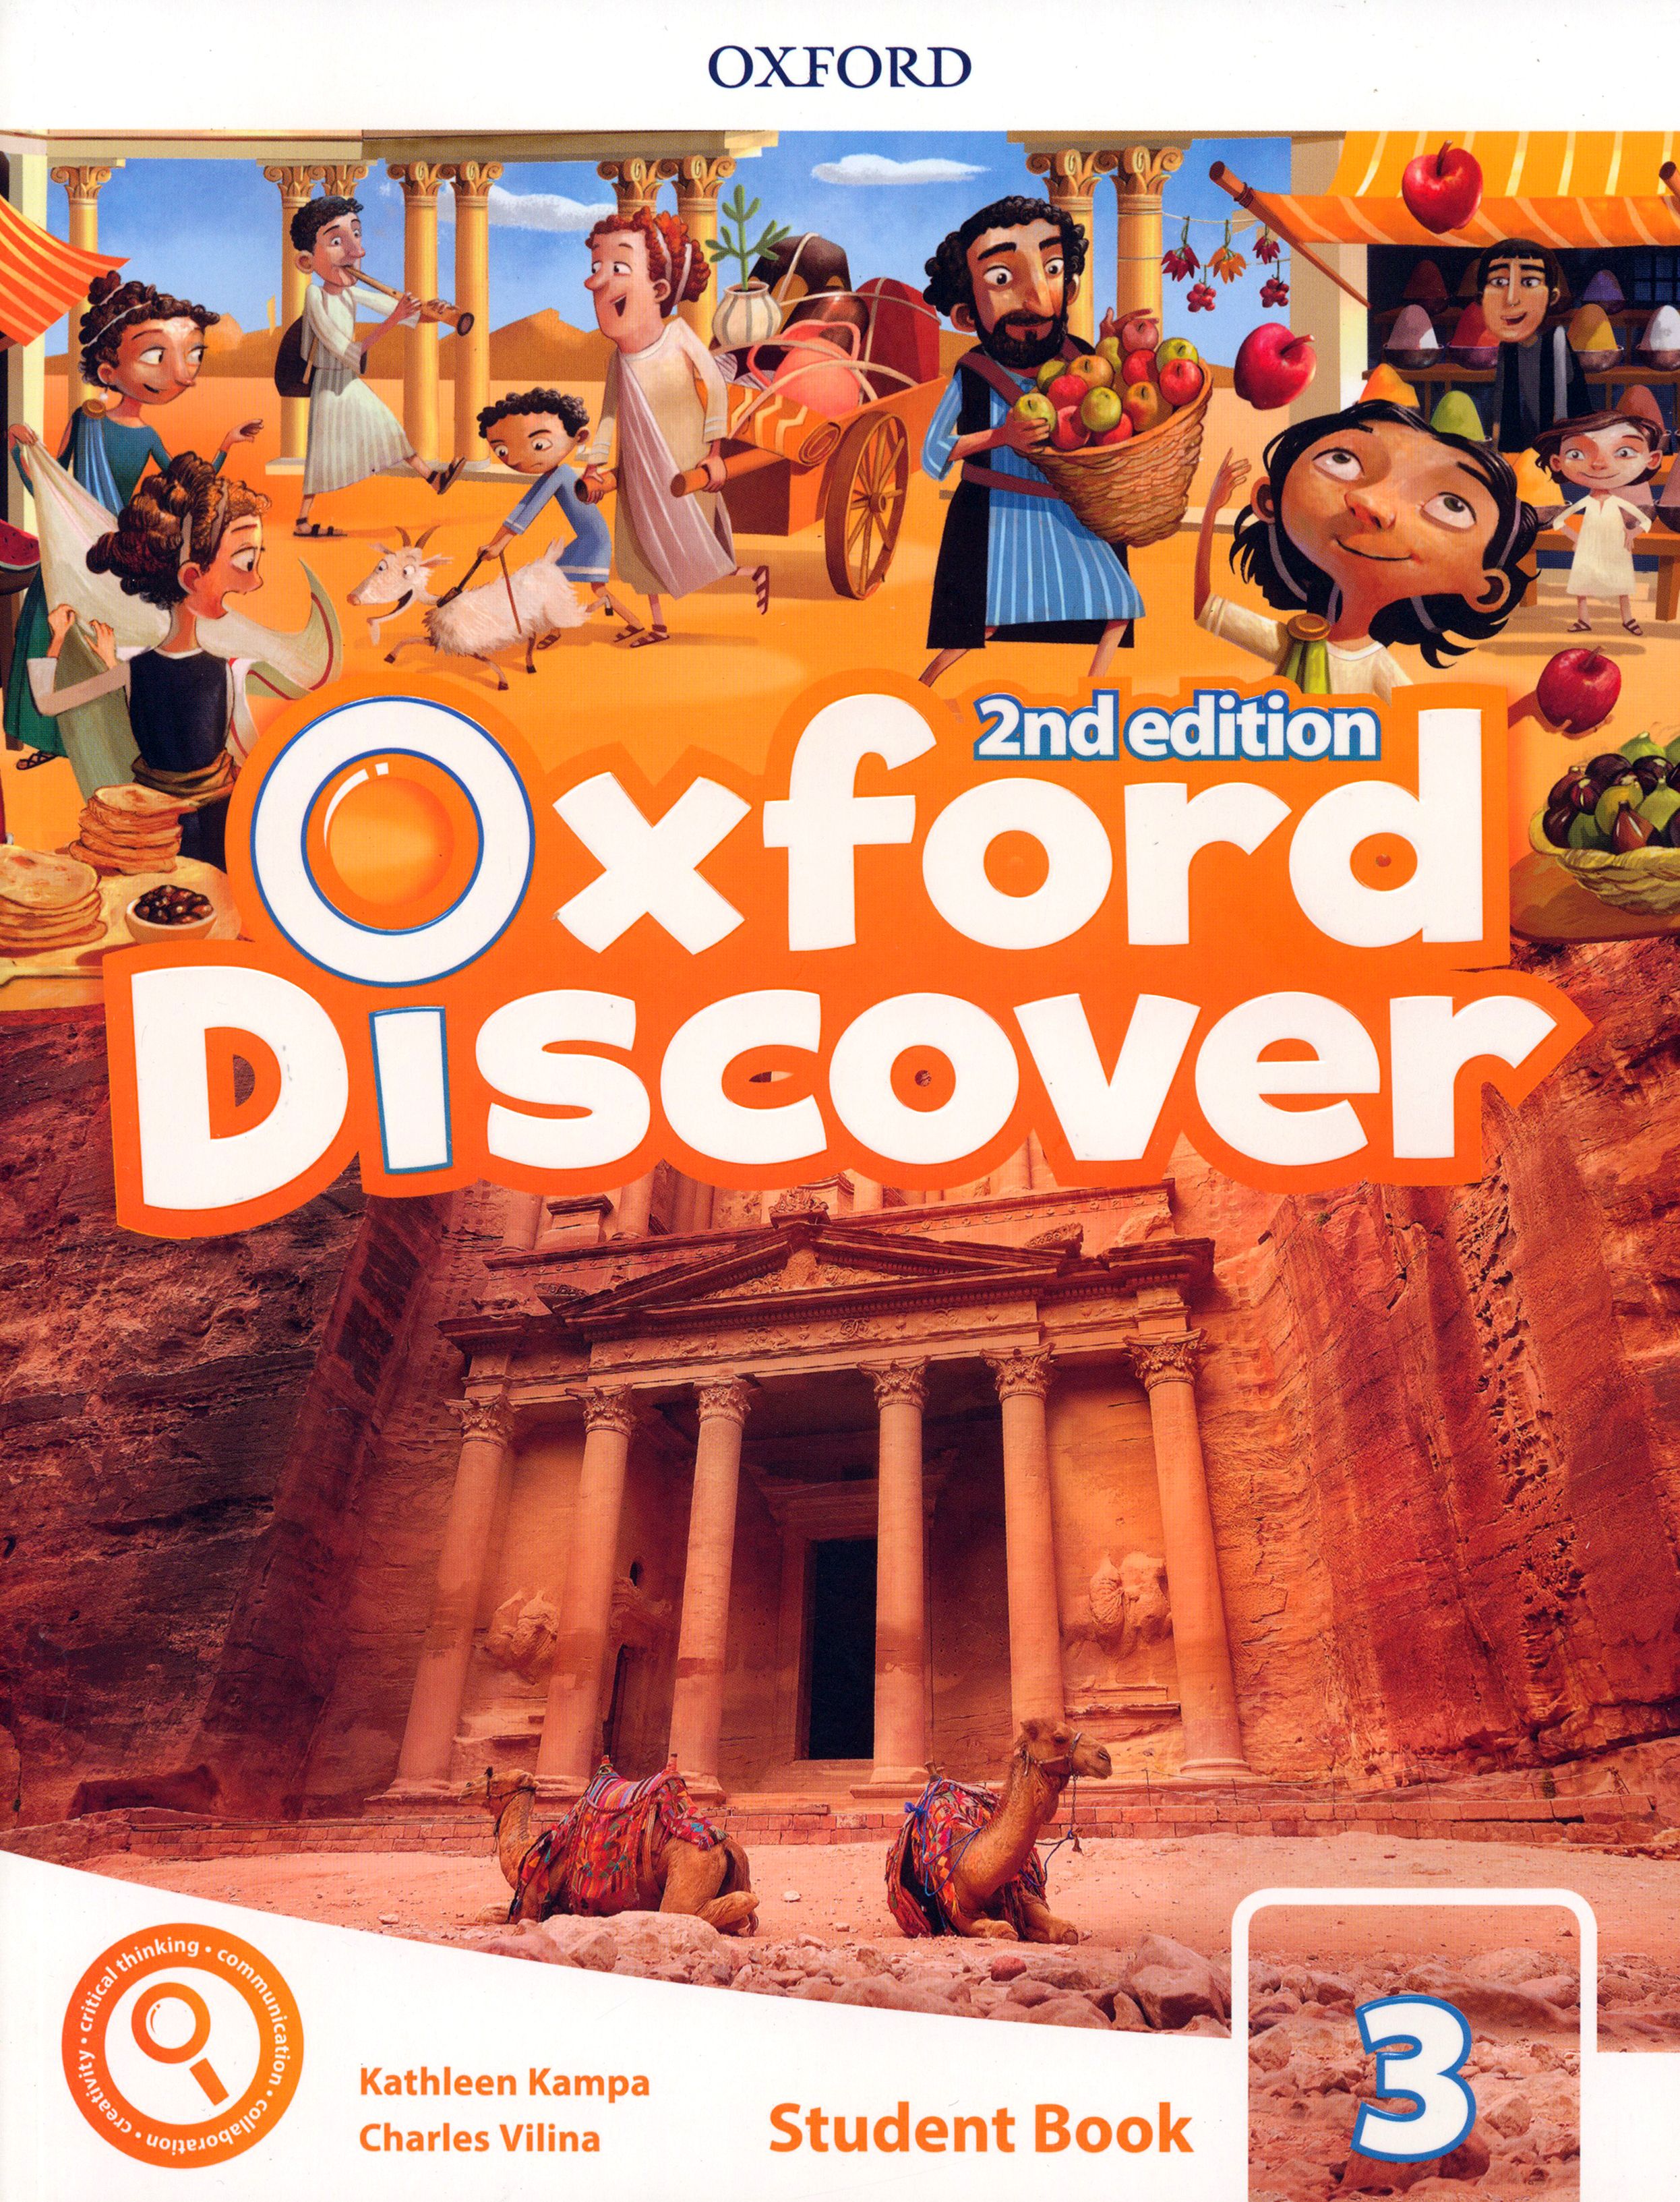 Oxford discover (2nd Edition) 3 student's book. Oxford discover 1 student's book 2nd Edition. Oxford discover 1 student book 2nd Edition Audio. Oxford discover 1 (student’s book, Workbook). Discover students book